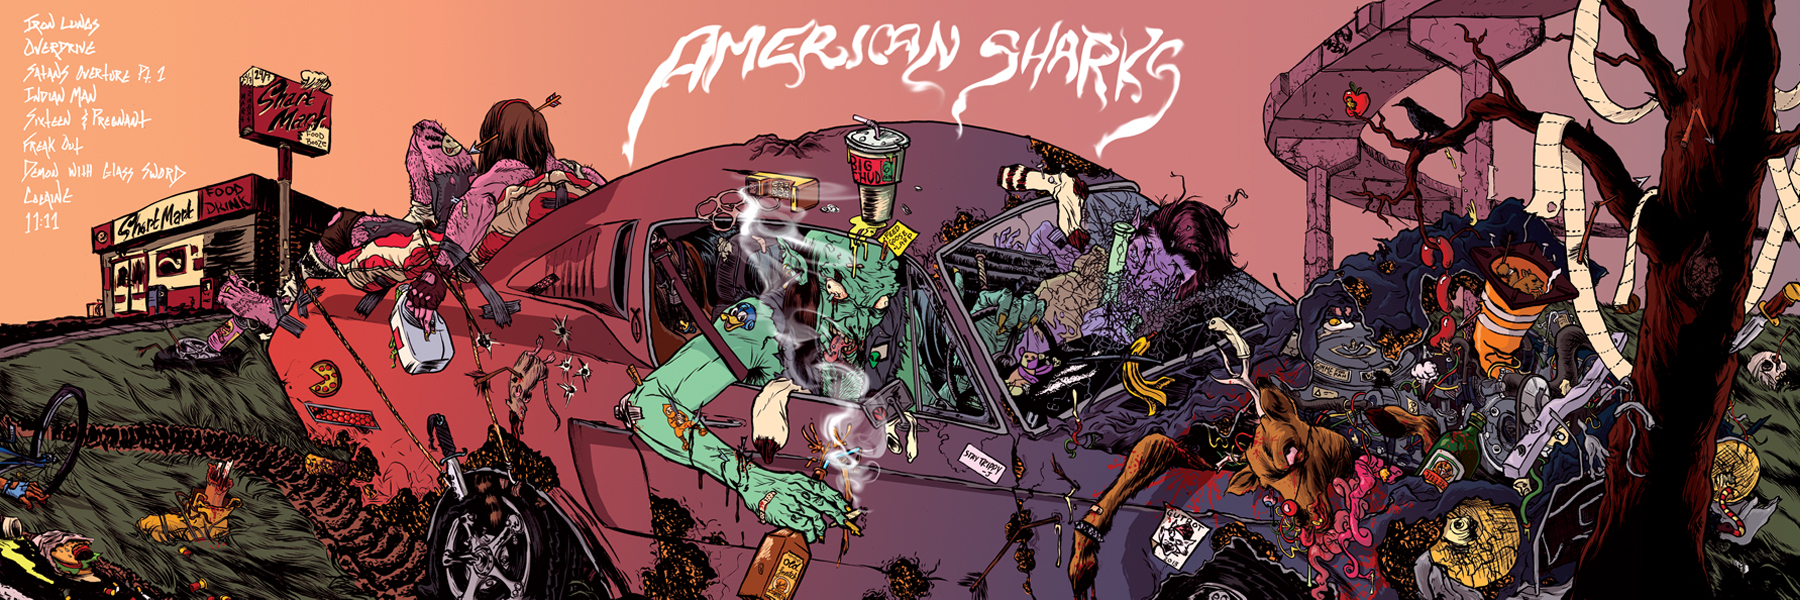 American Sharks Announce Debut Album for Sept. 17 on The End Records